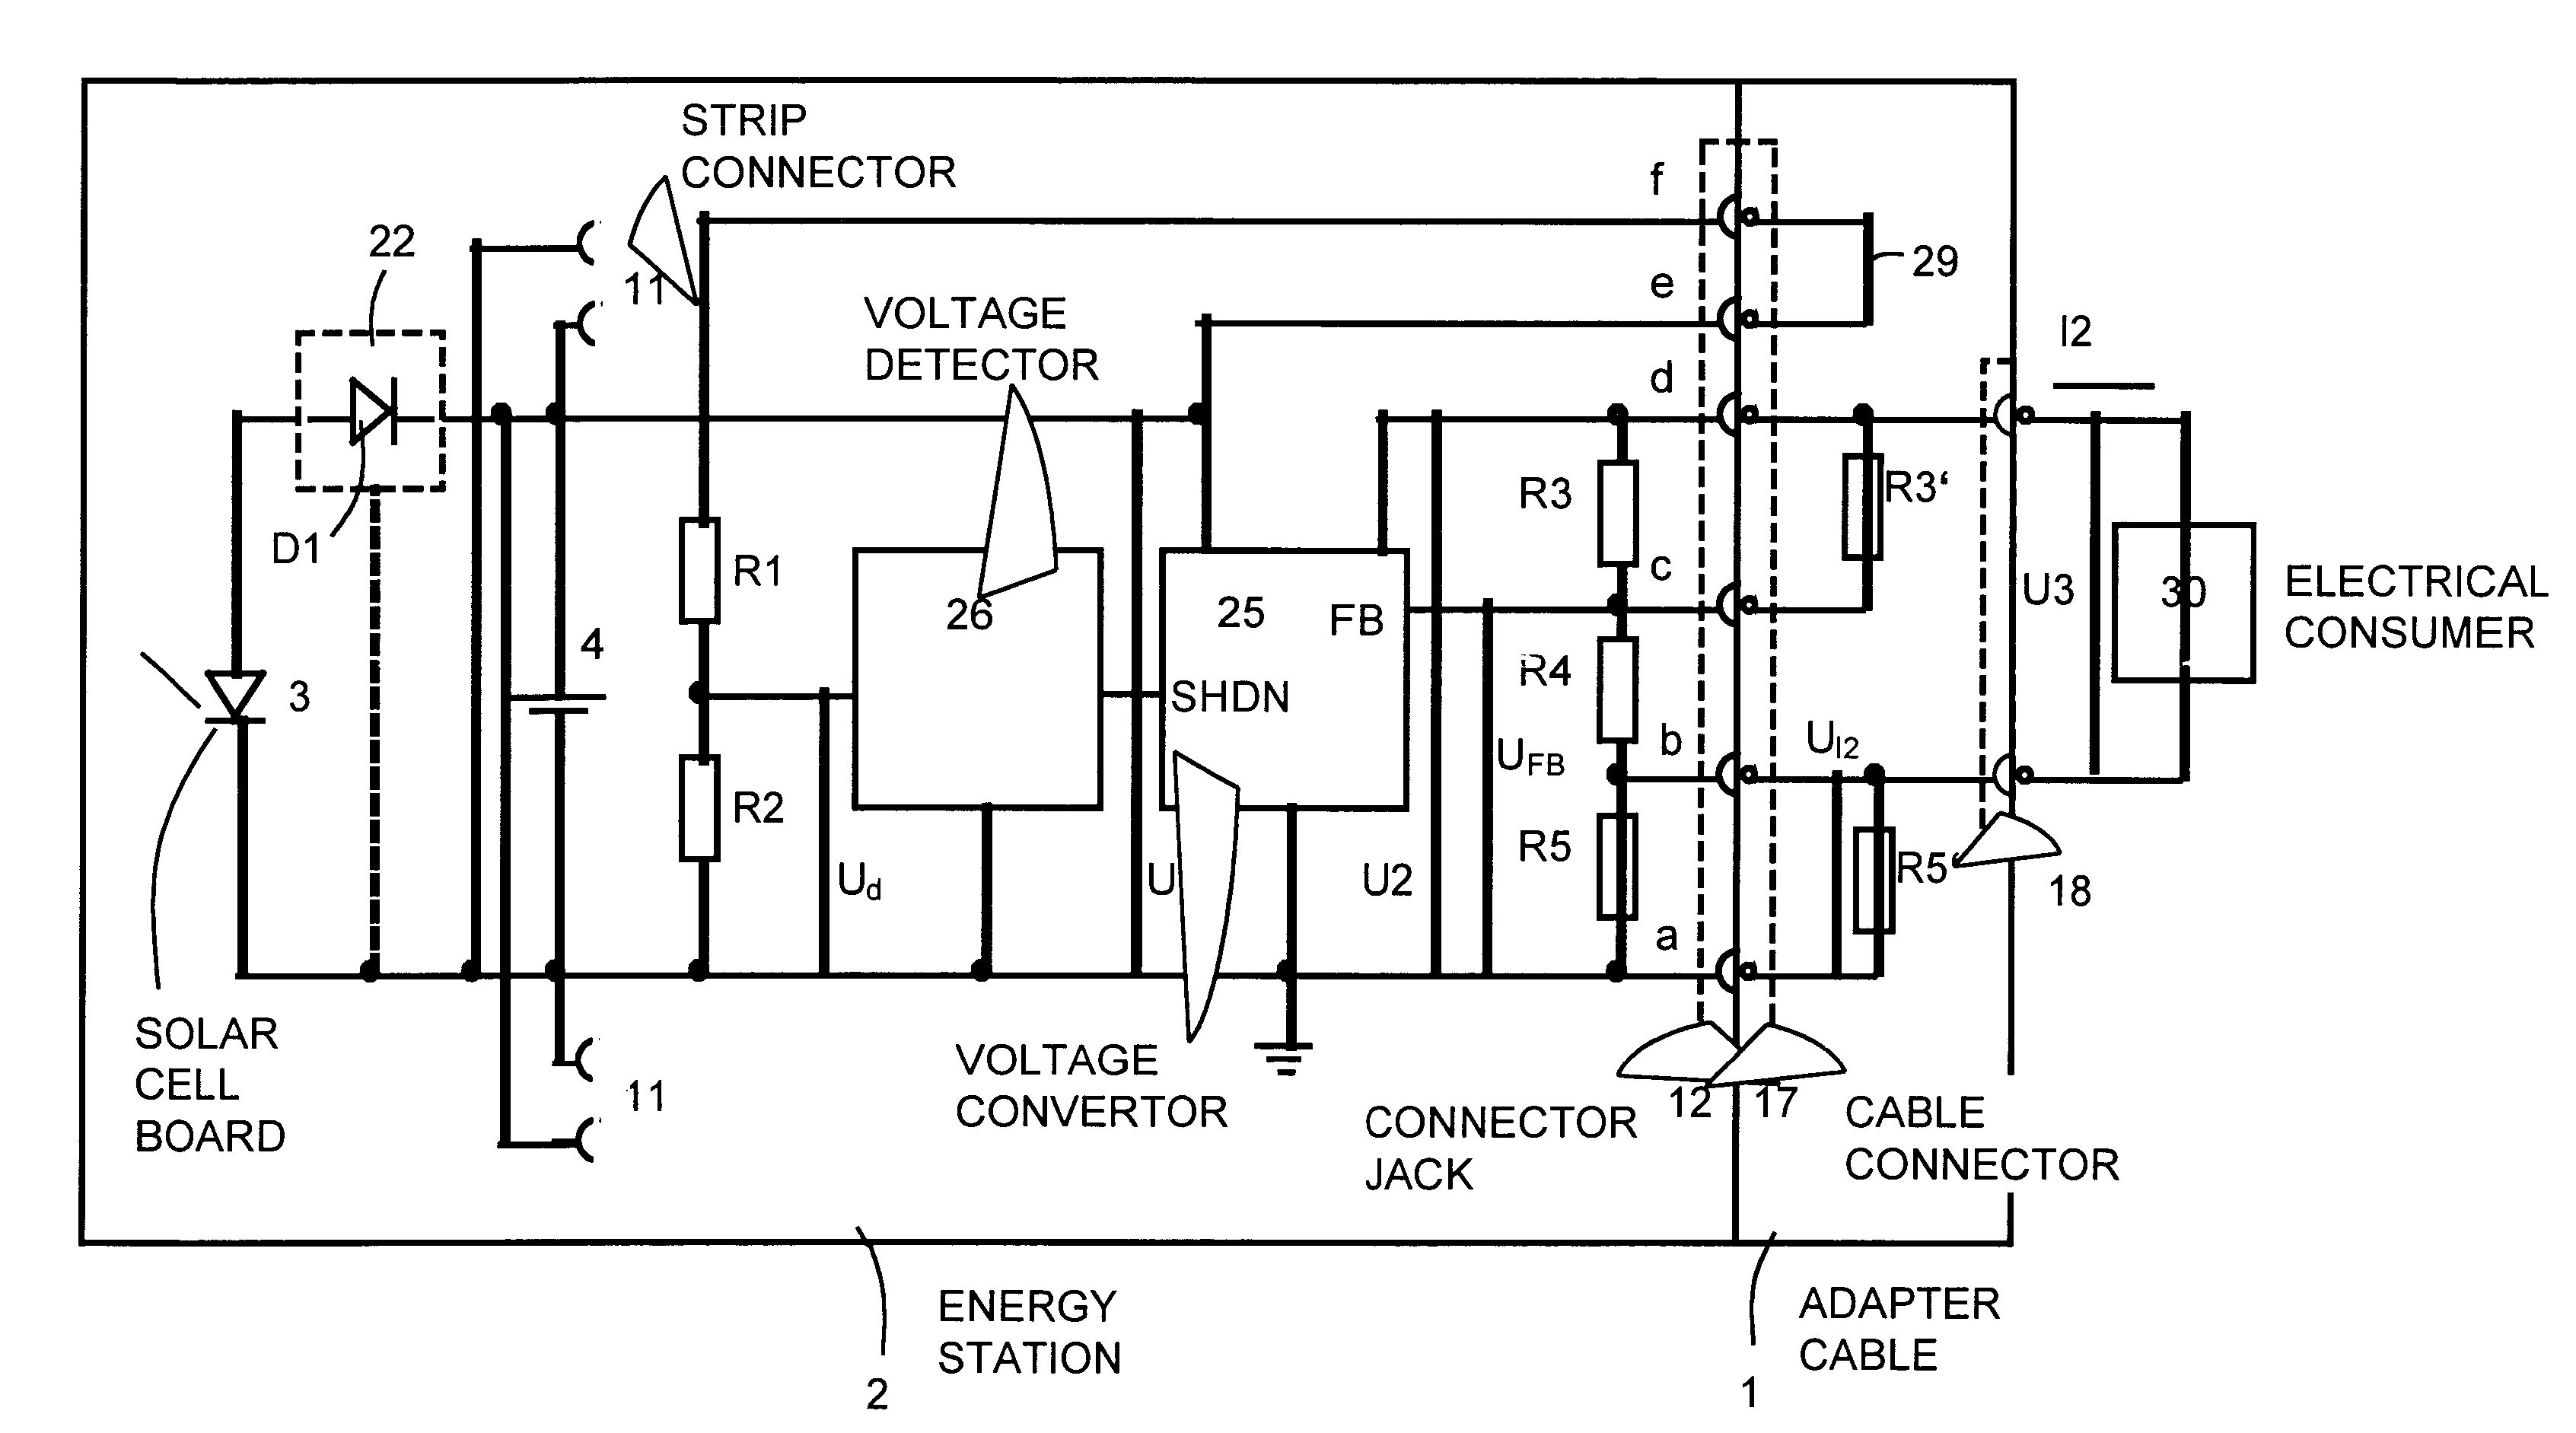 Universal power supply for different small electrical devices